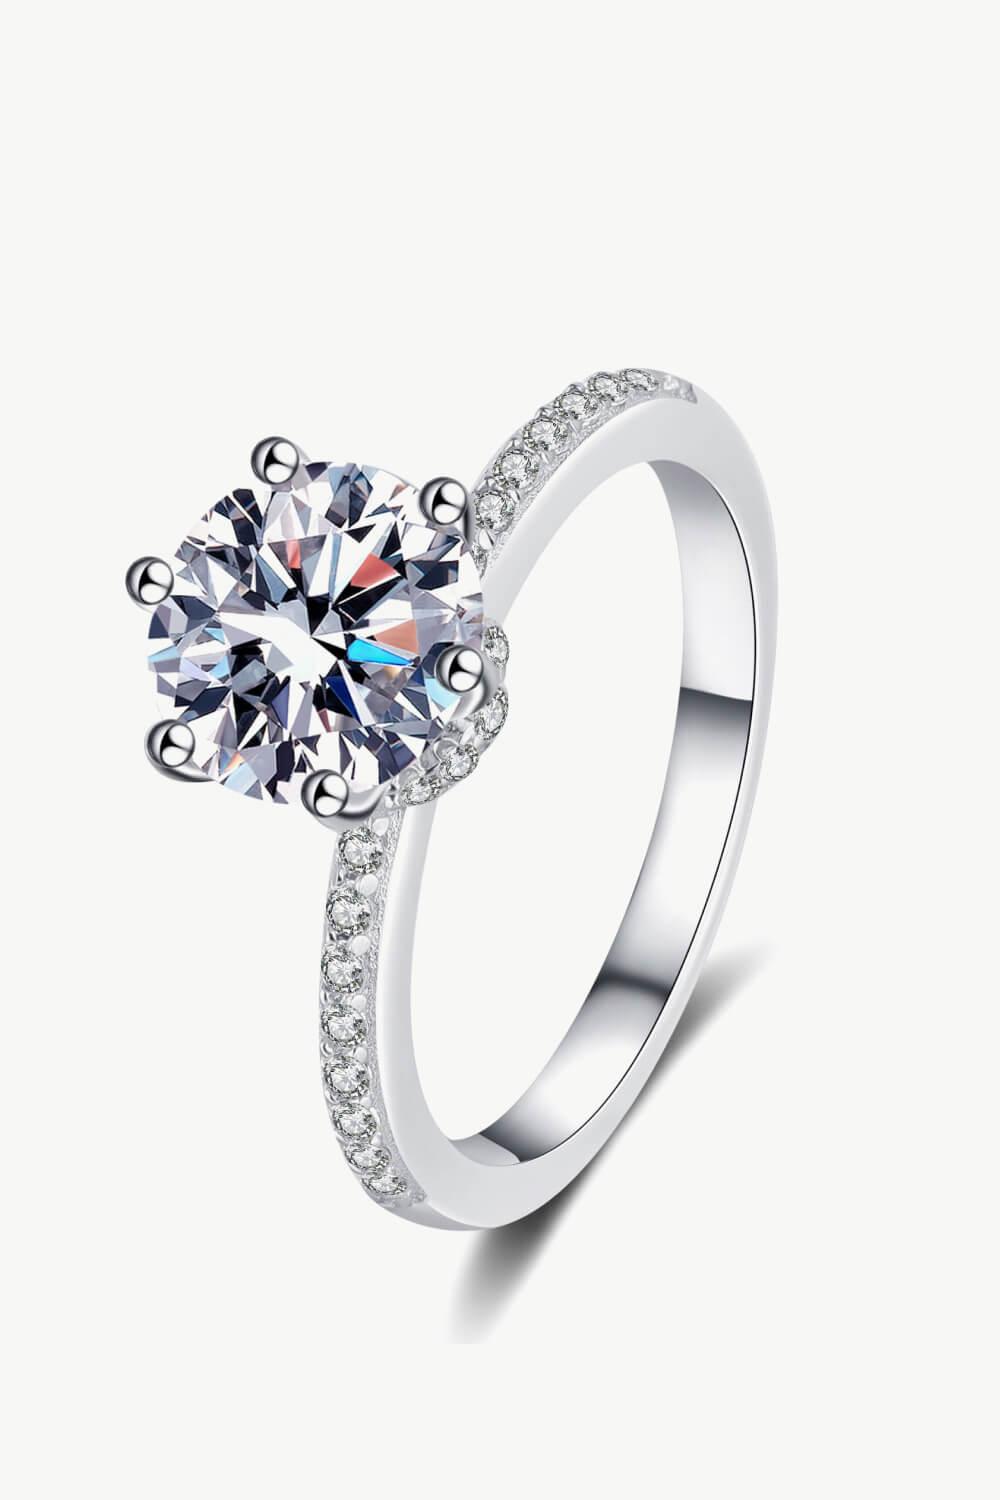 925 Sterling Silver 2 Carat Moissanite Ring - Lucianne Boutique